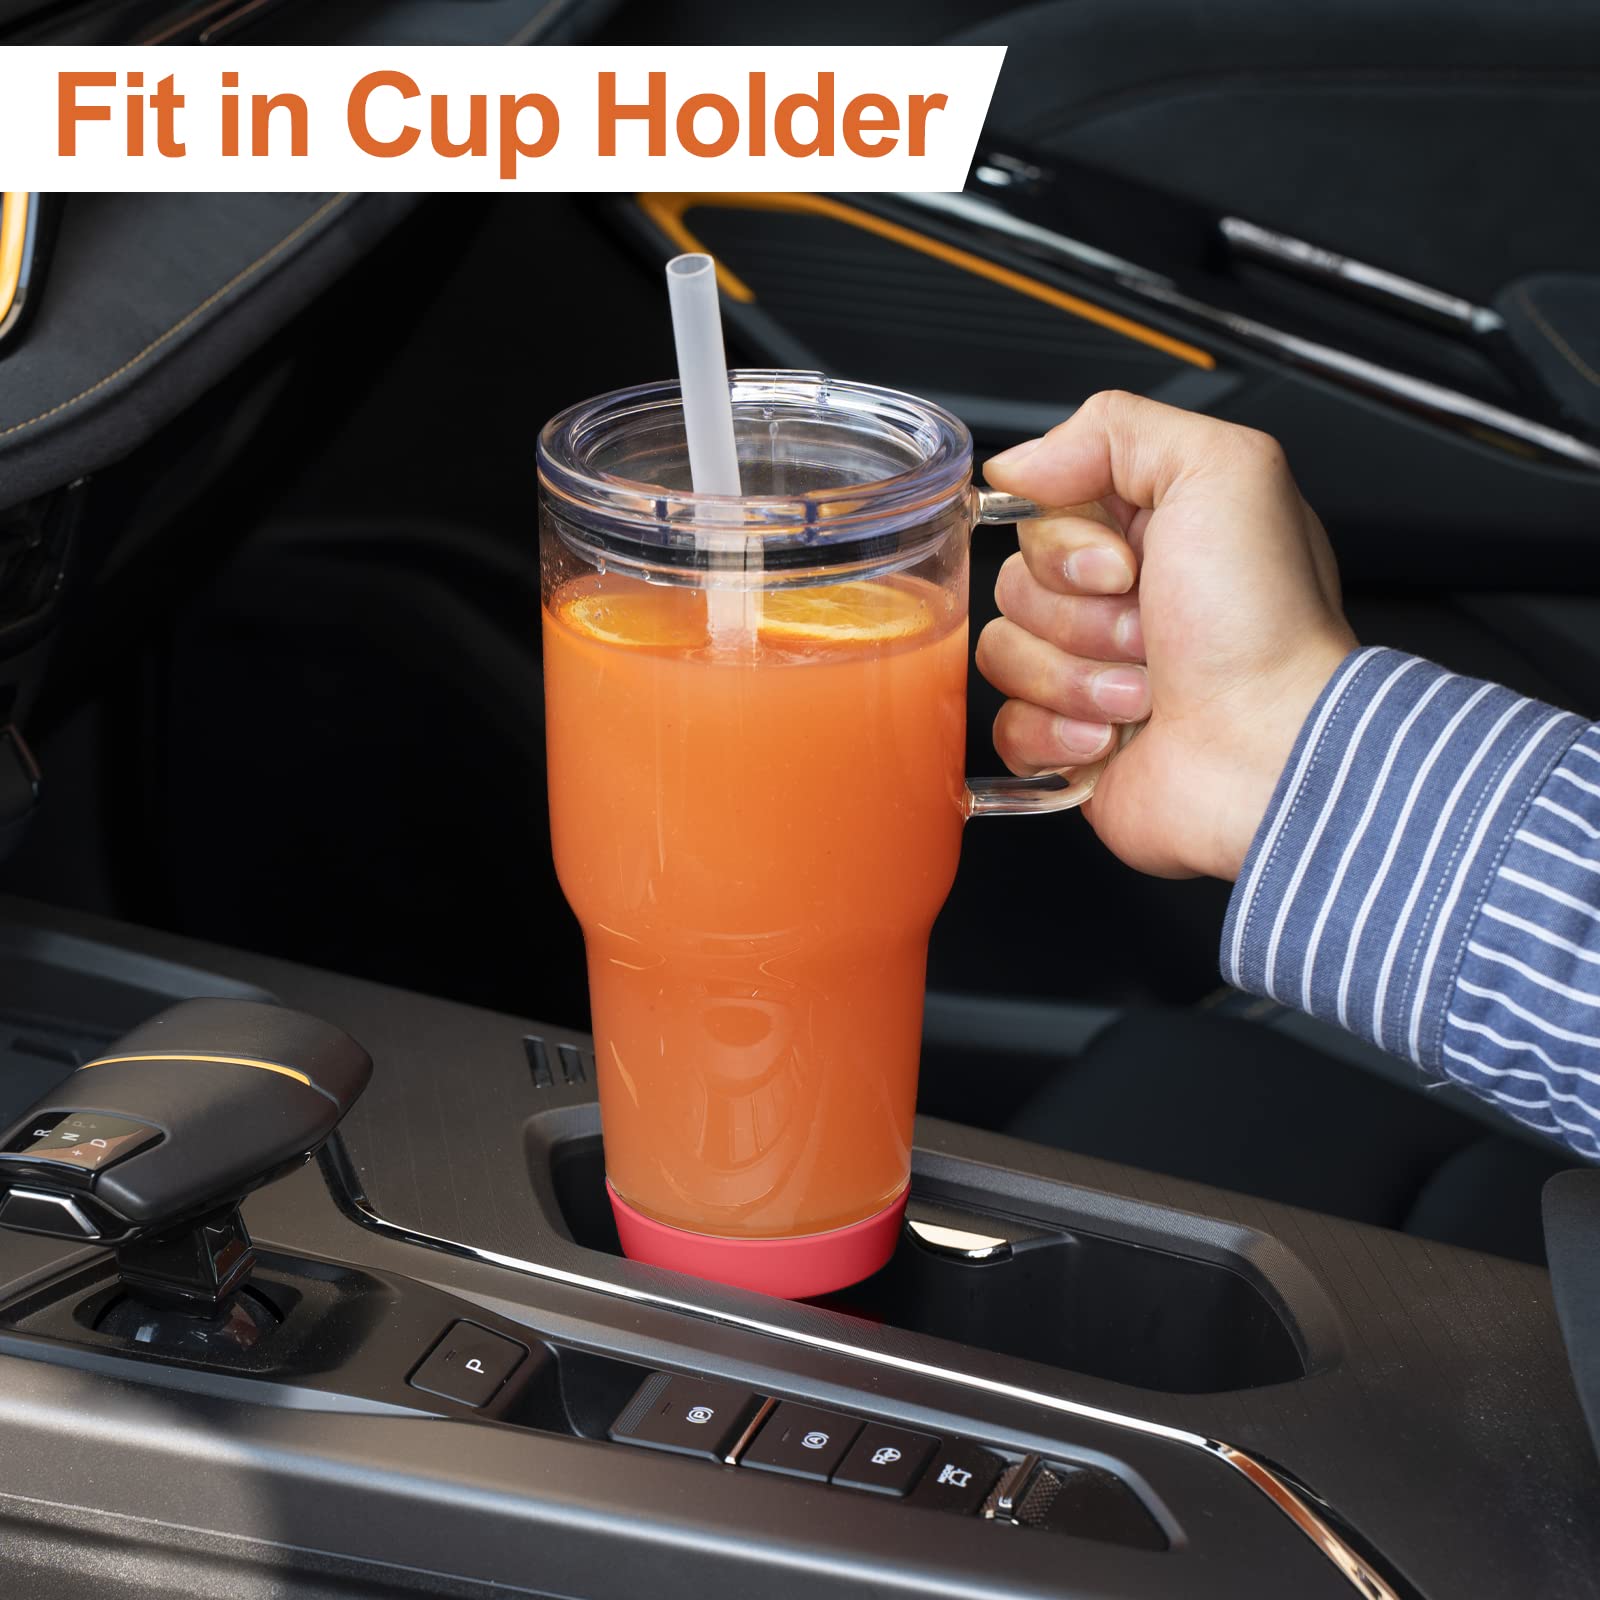 Zukro 32 oz Drinking Glass Tumbler with Handle, Iced Coffee Cup with Straw and Lid, Reusable Glass Water Cup With Silicone Bumper for Beer, Fits In Cup Holder, Dishwasher Safe, BPA Free, Watermelon